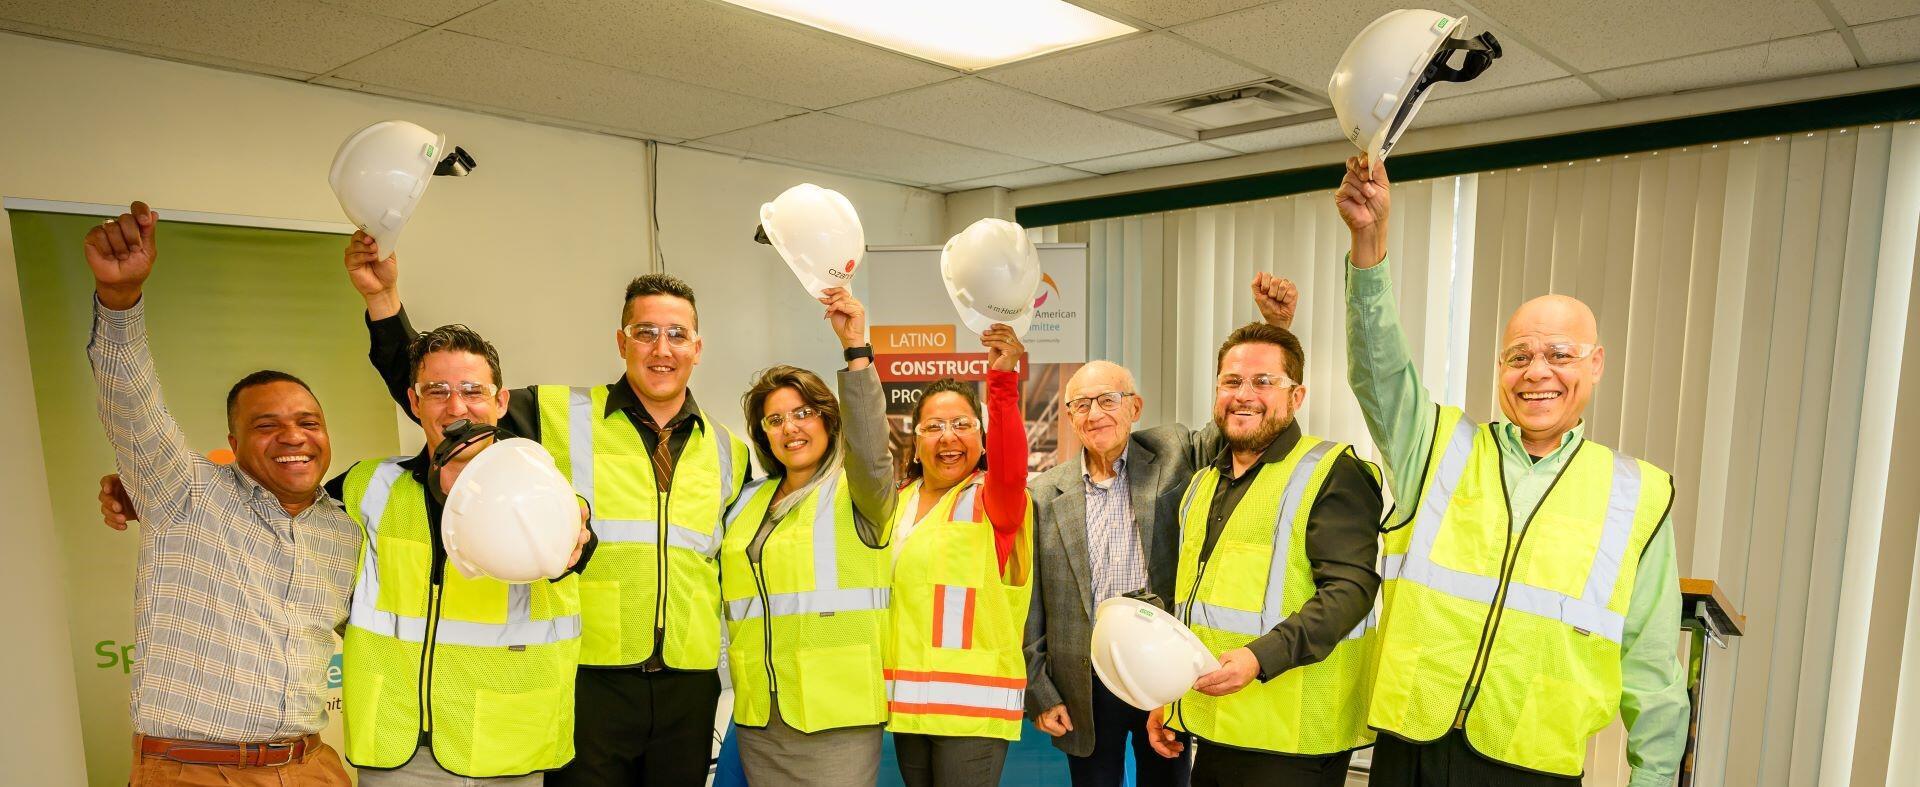 The 2023 graduates of our Latino Construction Program raise their hard hats